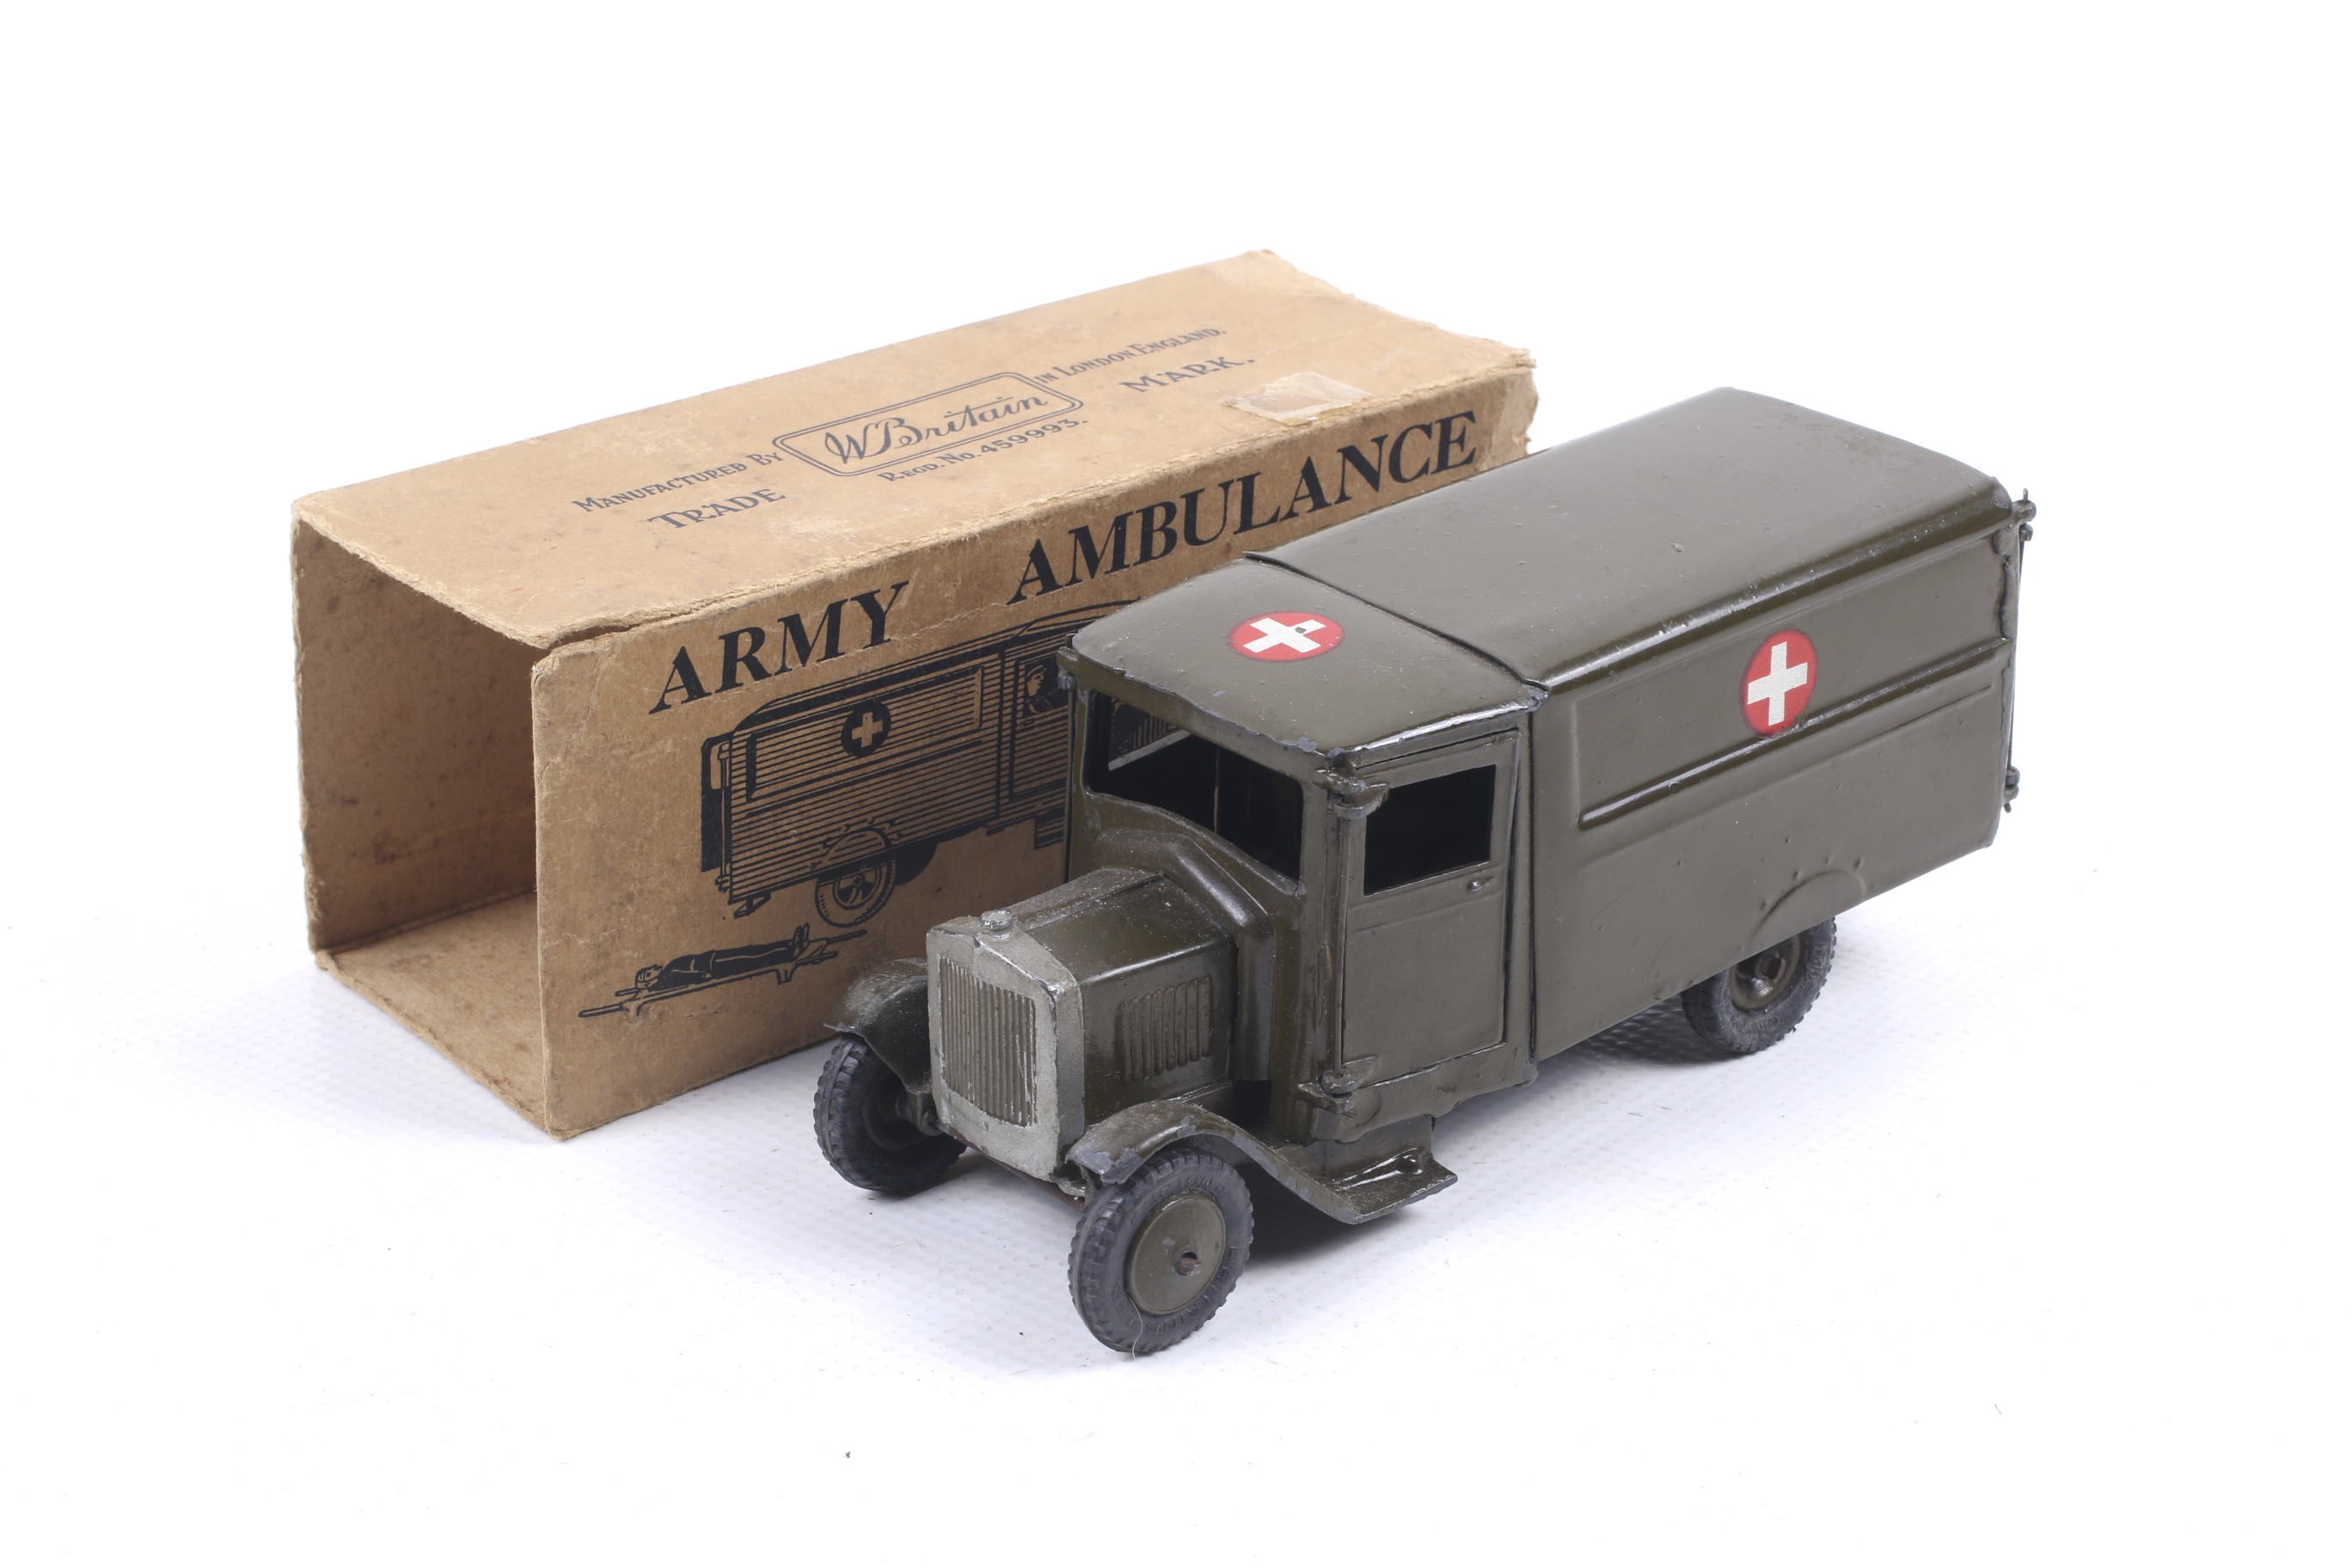 A W Britain diecast military field ambulance. Complete with driver and accessories, in damaged box.